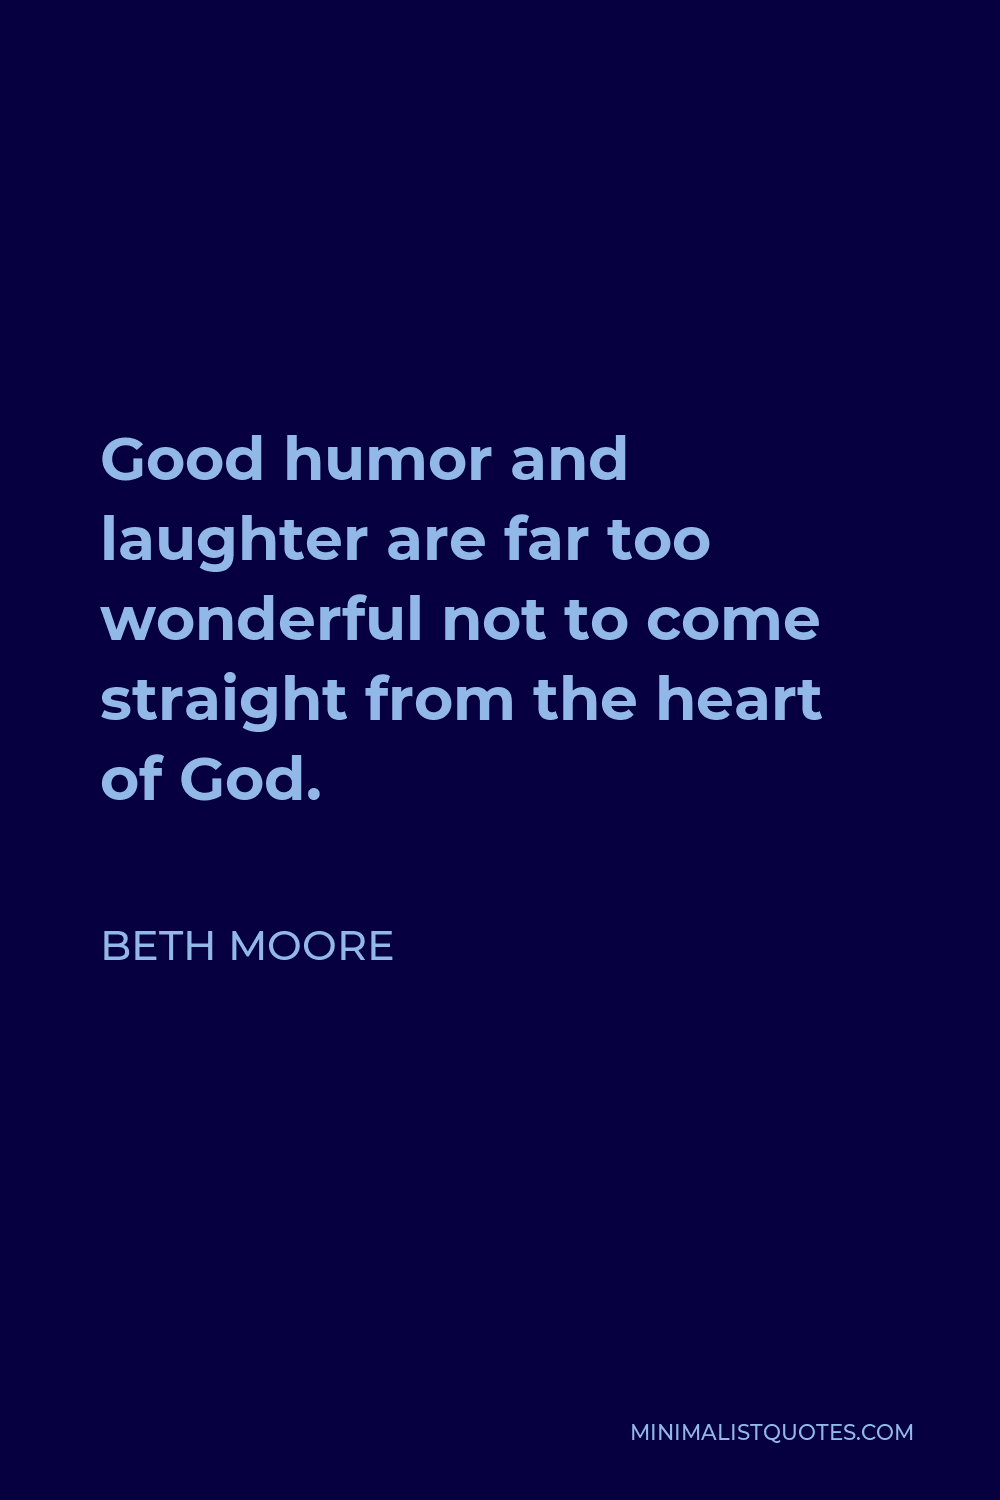 Beth Moore Quote - Good humor and laughter are far too wonderful not to come straight from the heart of God.